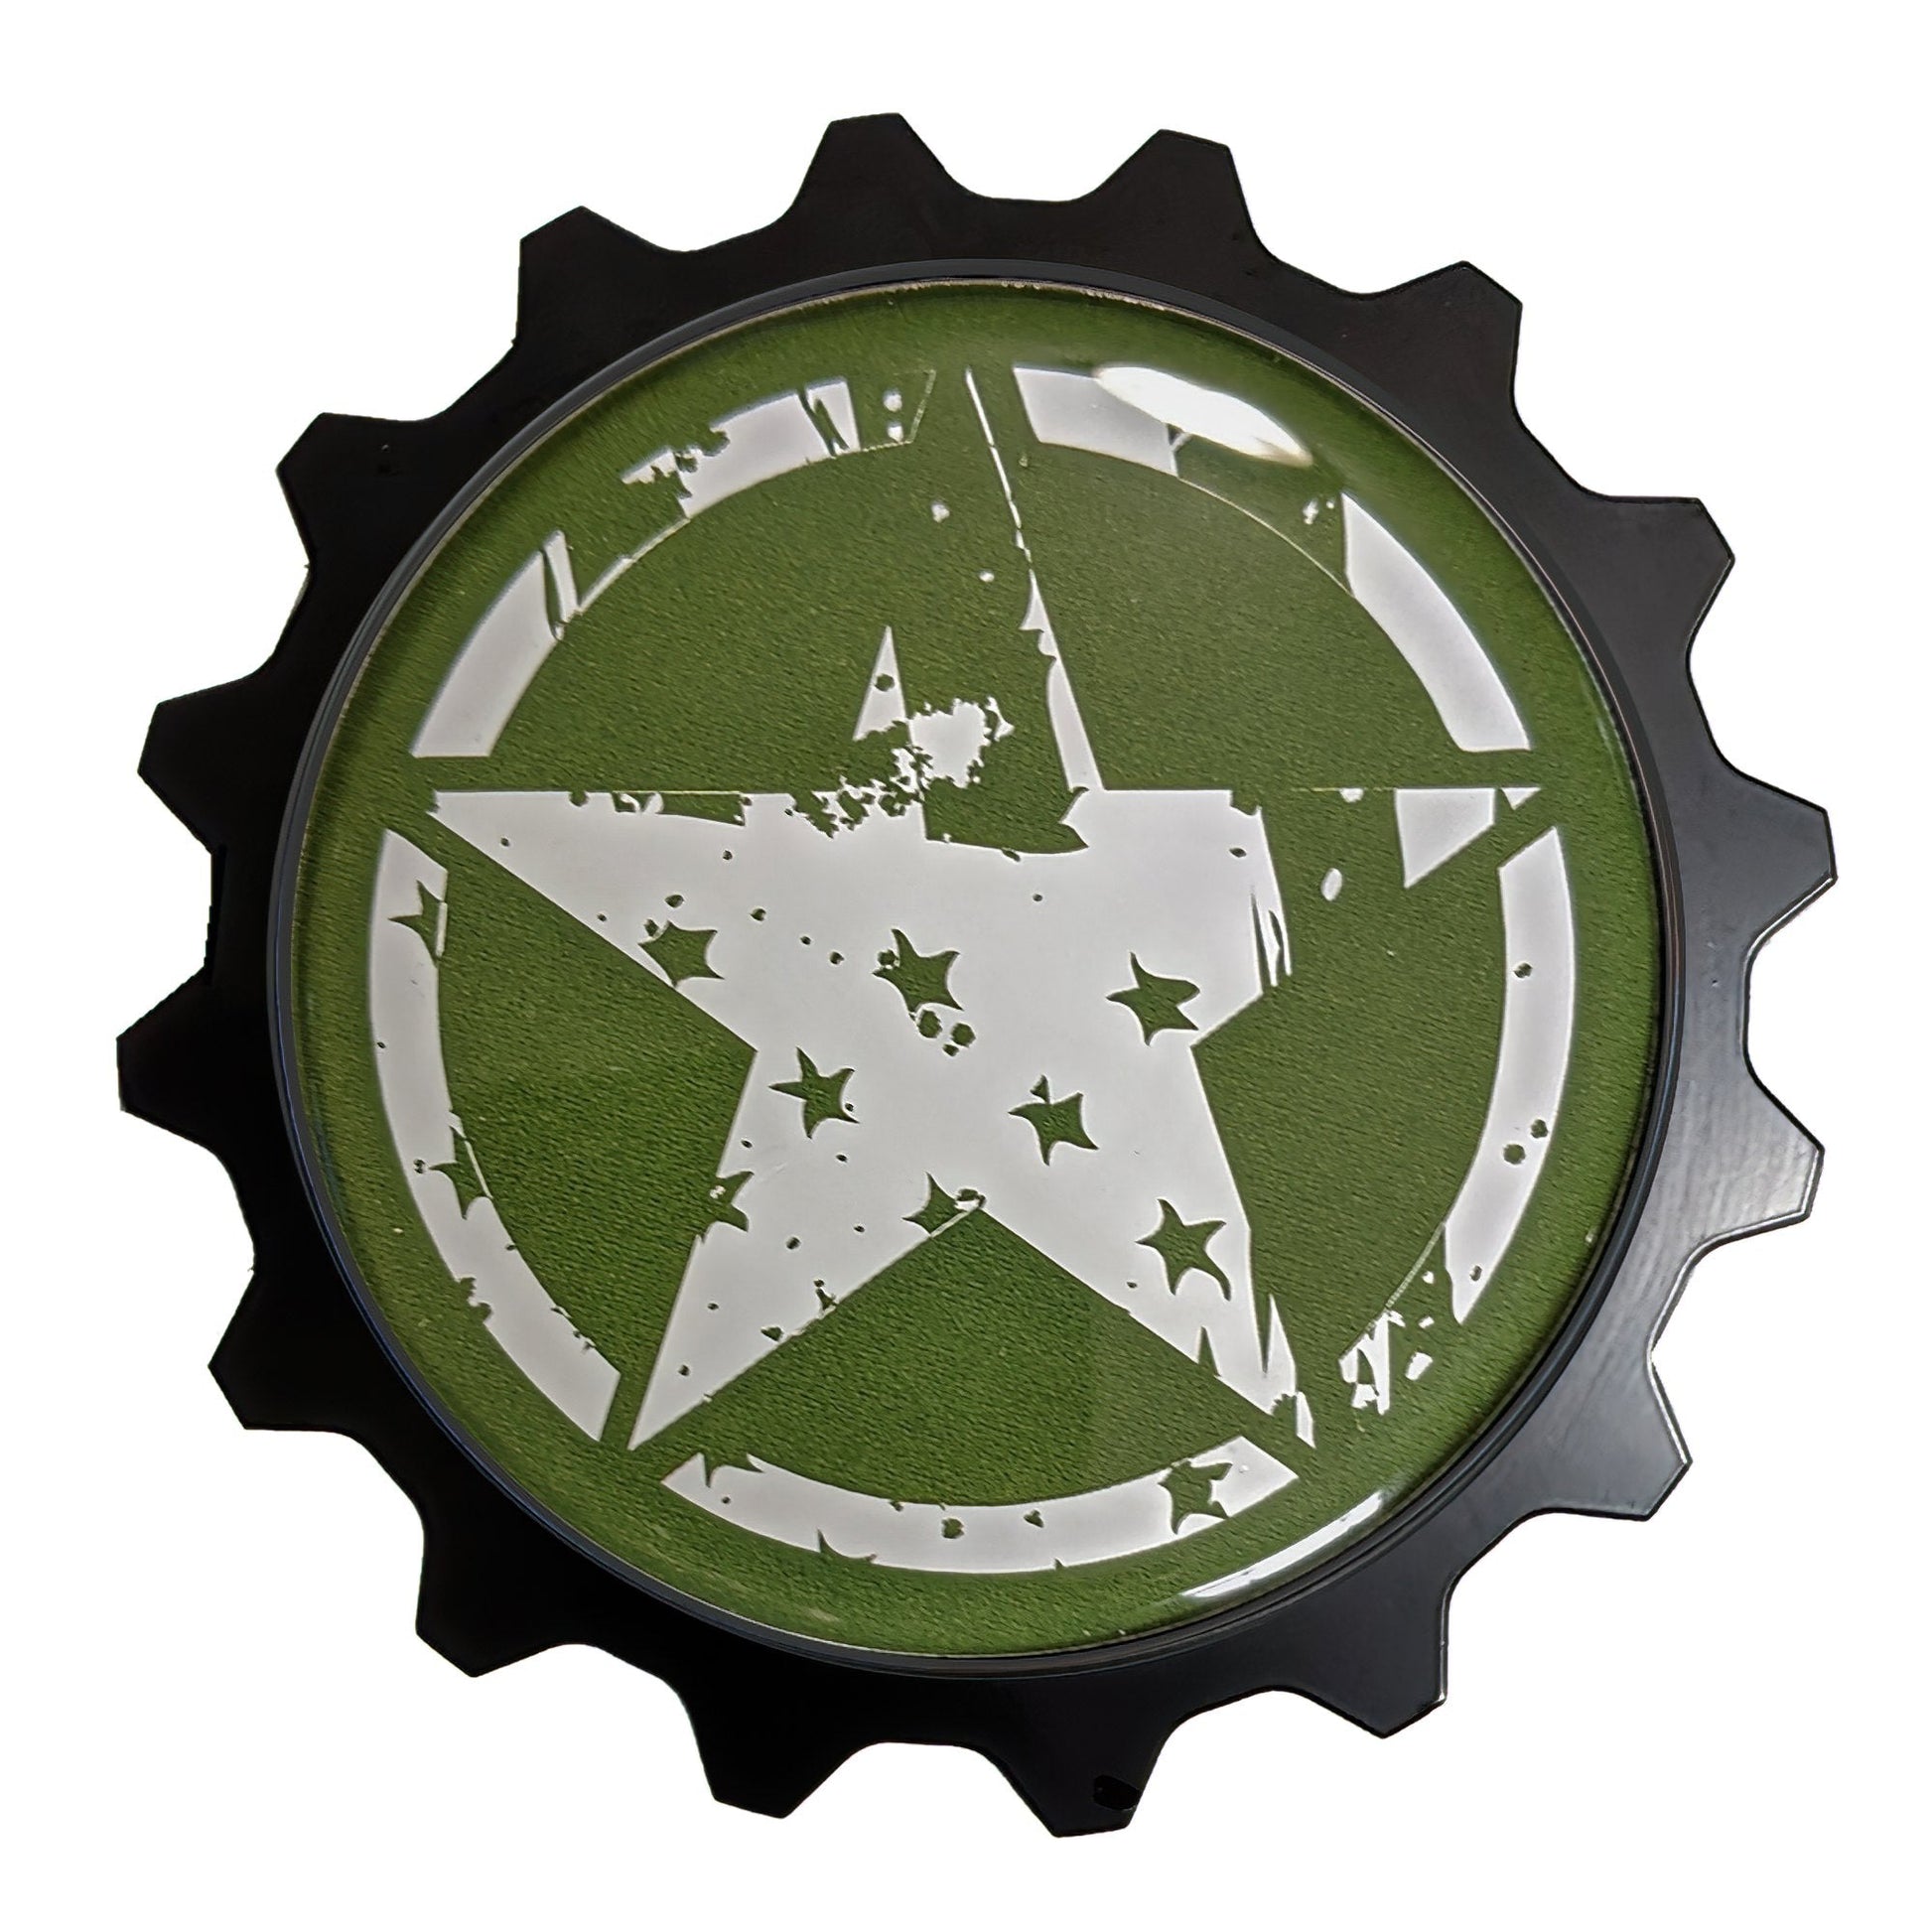 Fits Trail Rated Areas, Popular For Jeep Wrangler Gladiator Badge Fans, These Tattered Star Grille Badges Look Great On Any 4WD 4x4, an excellent choice for a Toyota 4WD Replacement Emblem